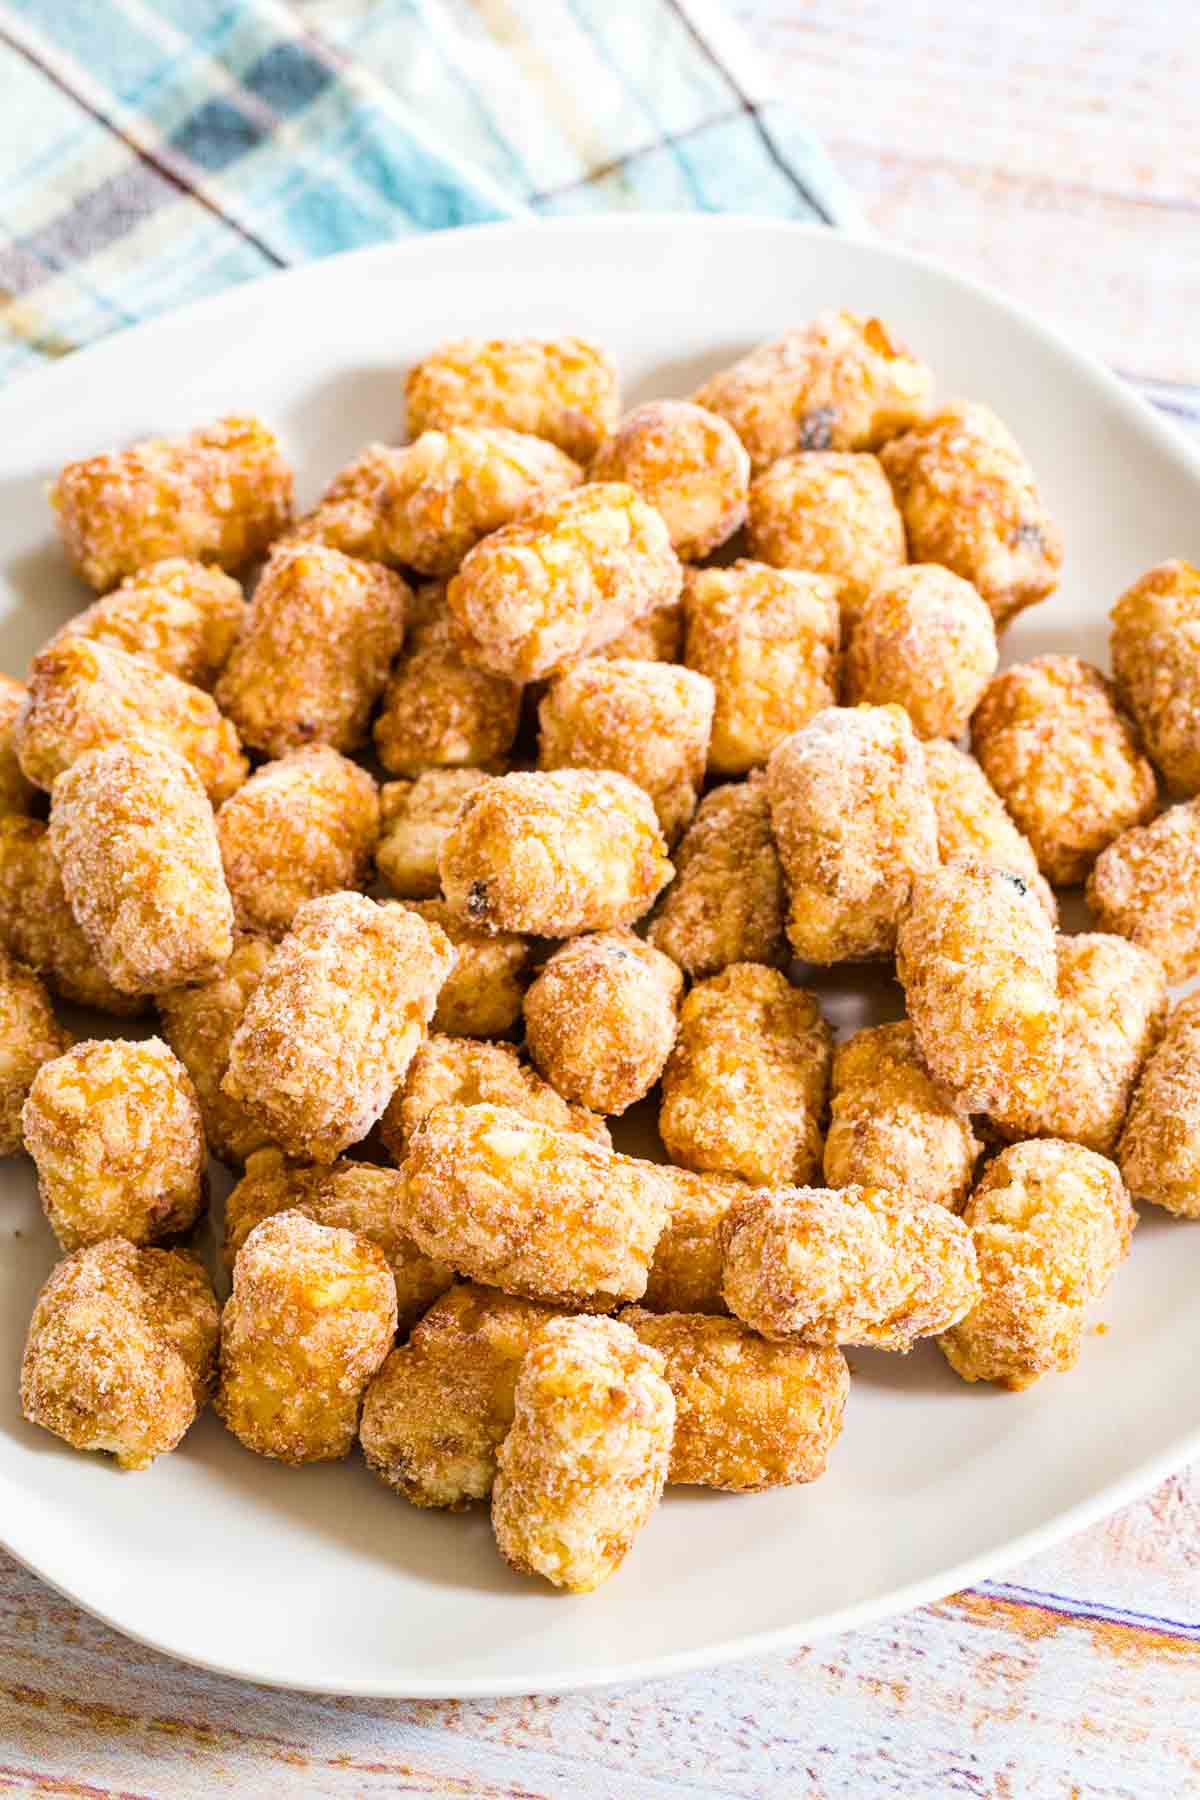 Frozen tater tots are shown on a white plate.